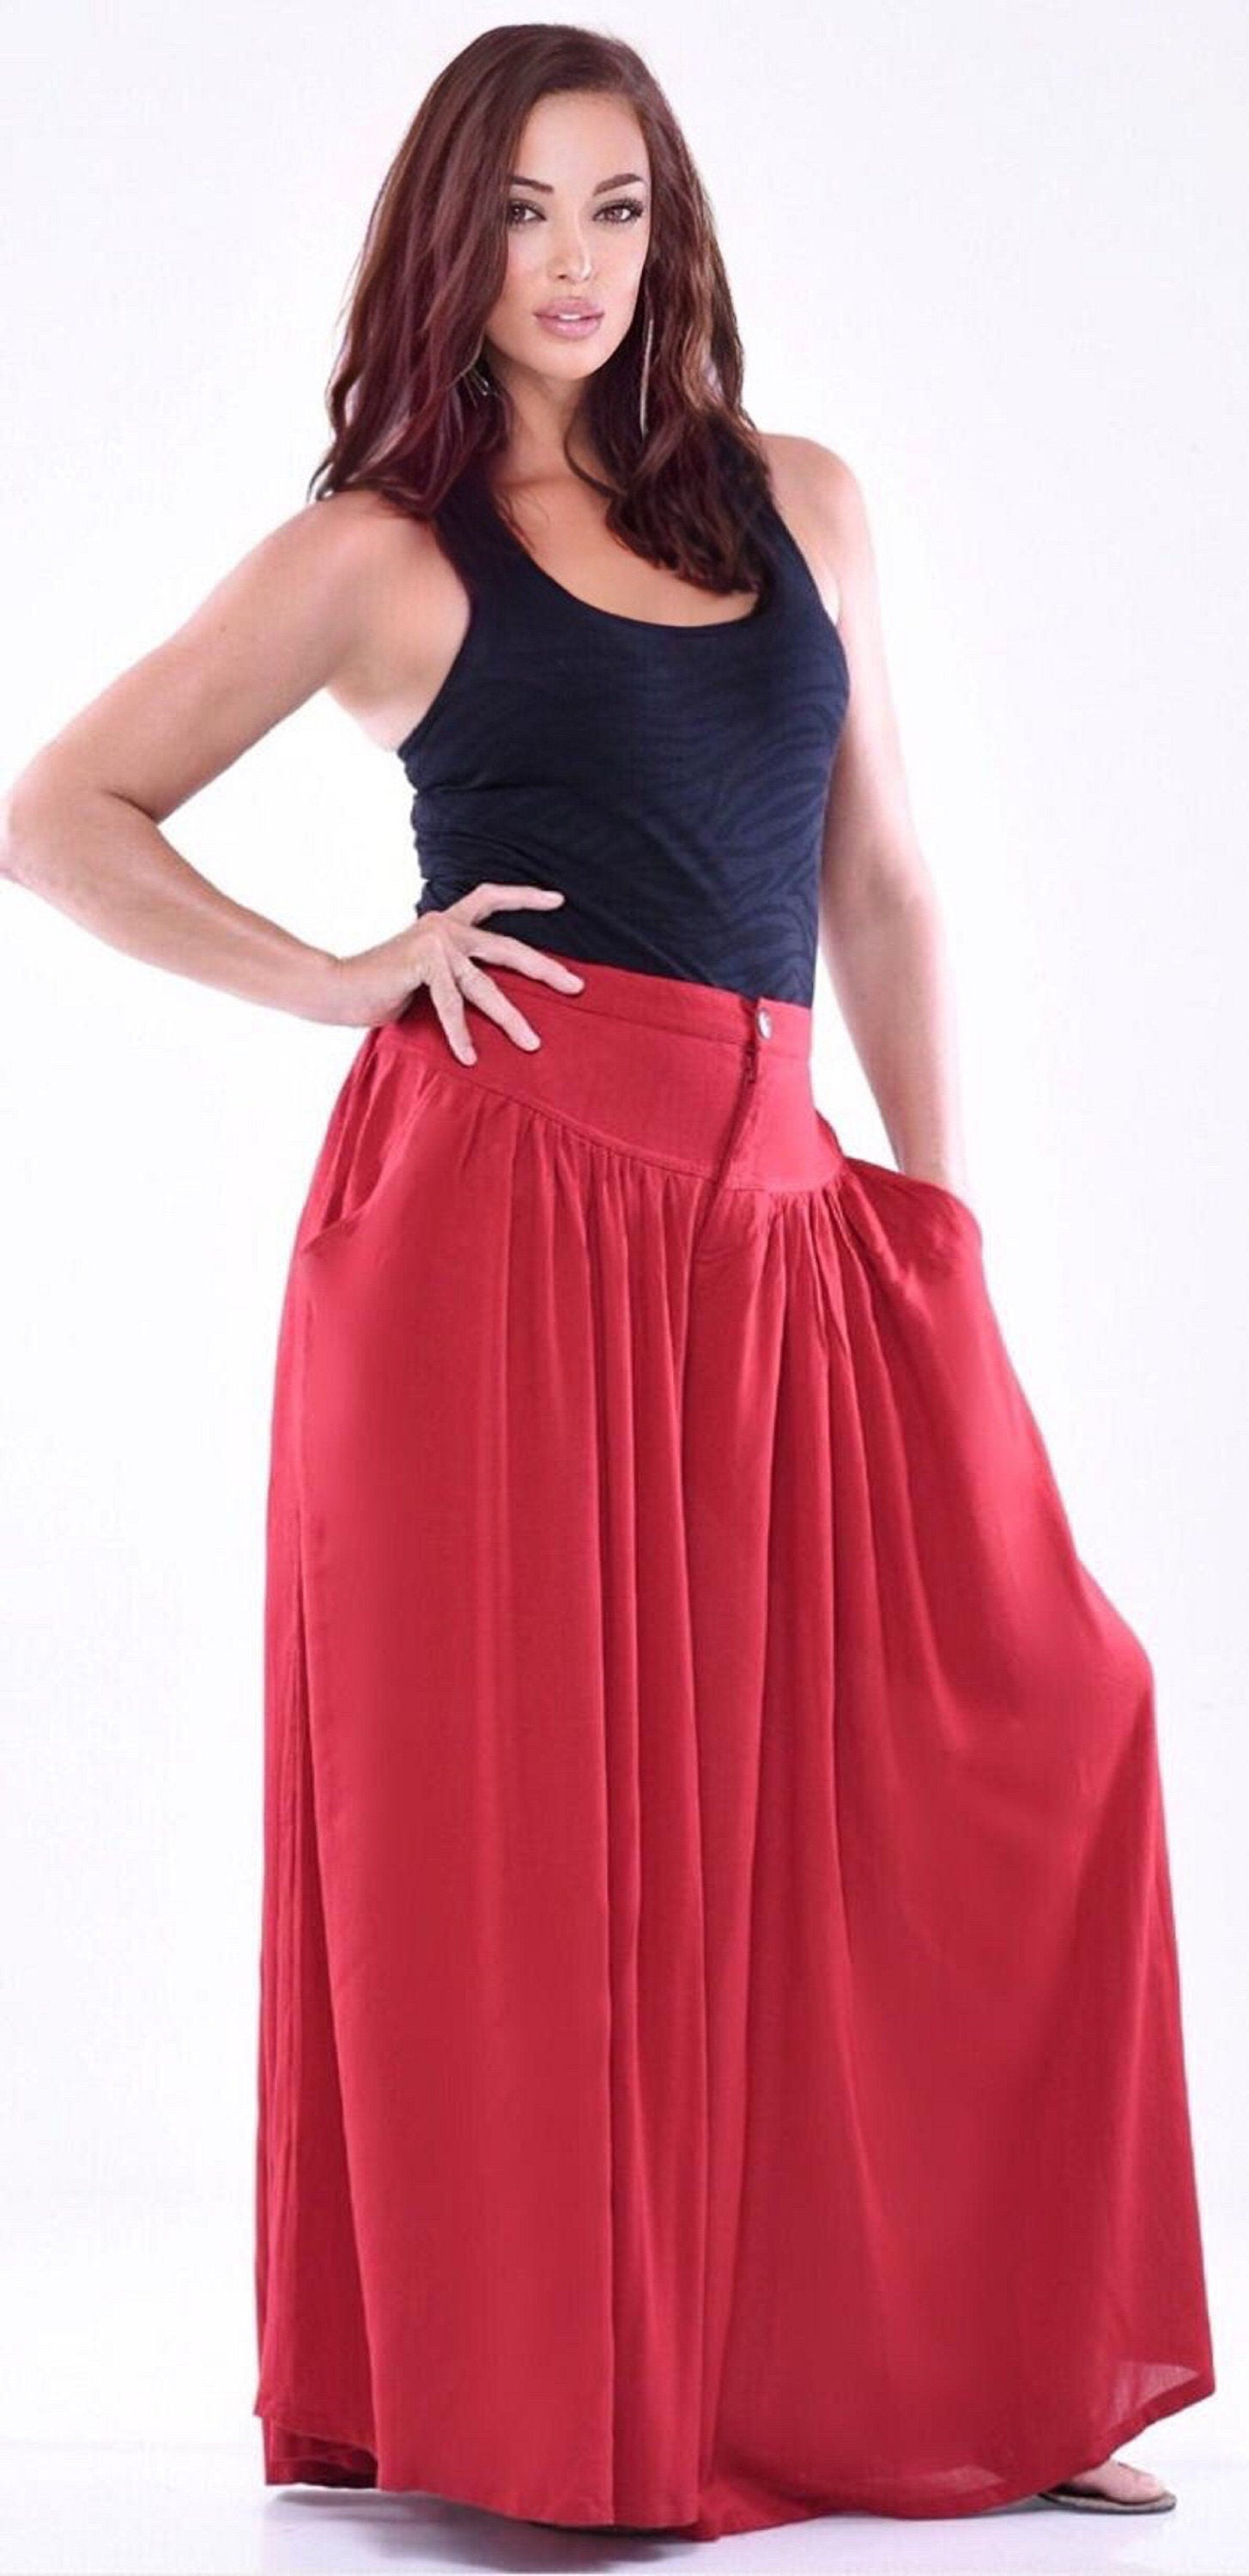 How to make a maxi skirt from pants. with slit. - B+C Guides